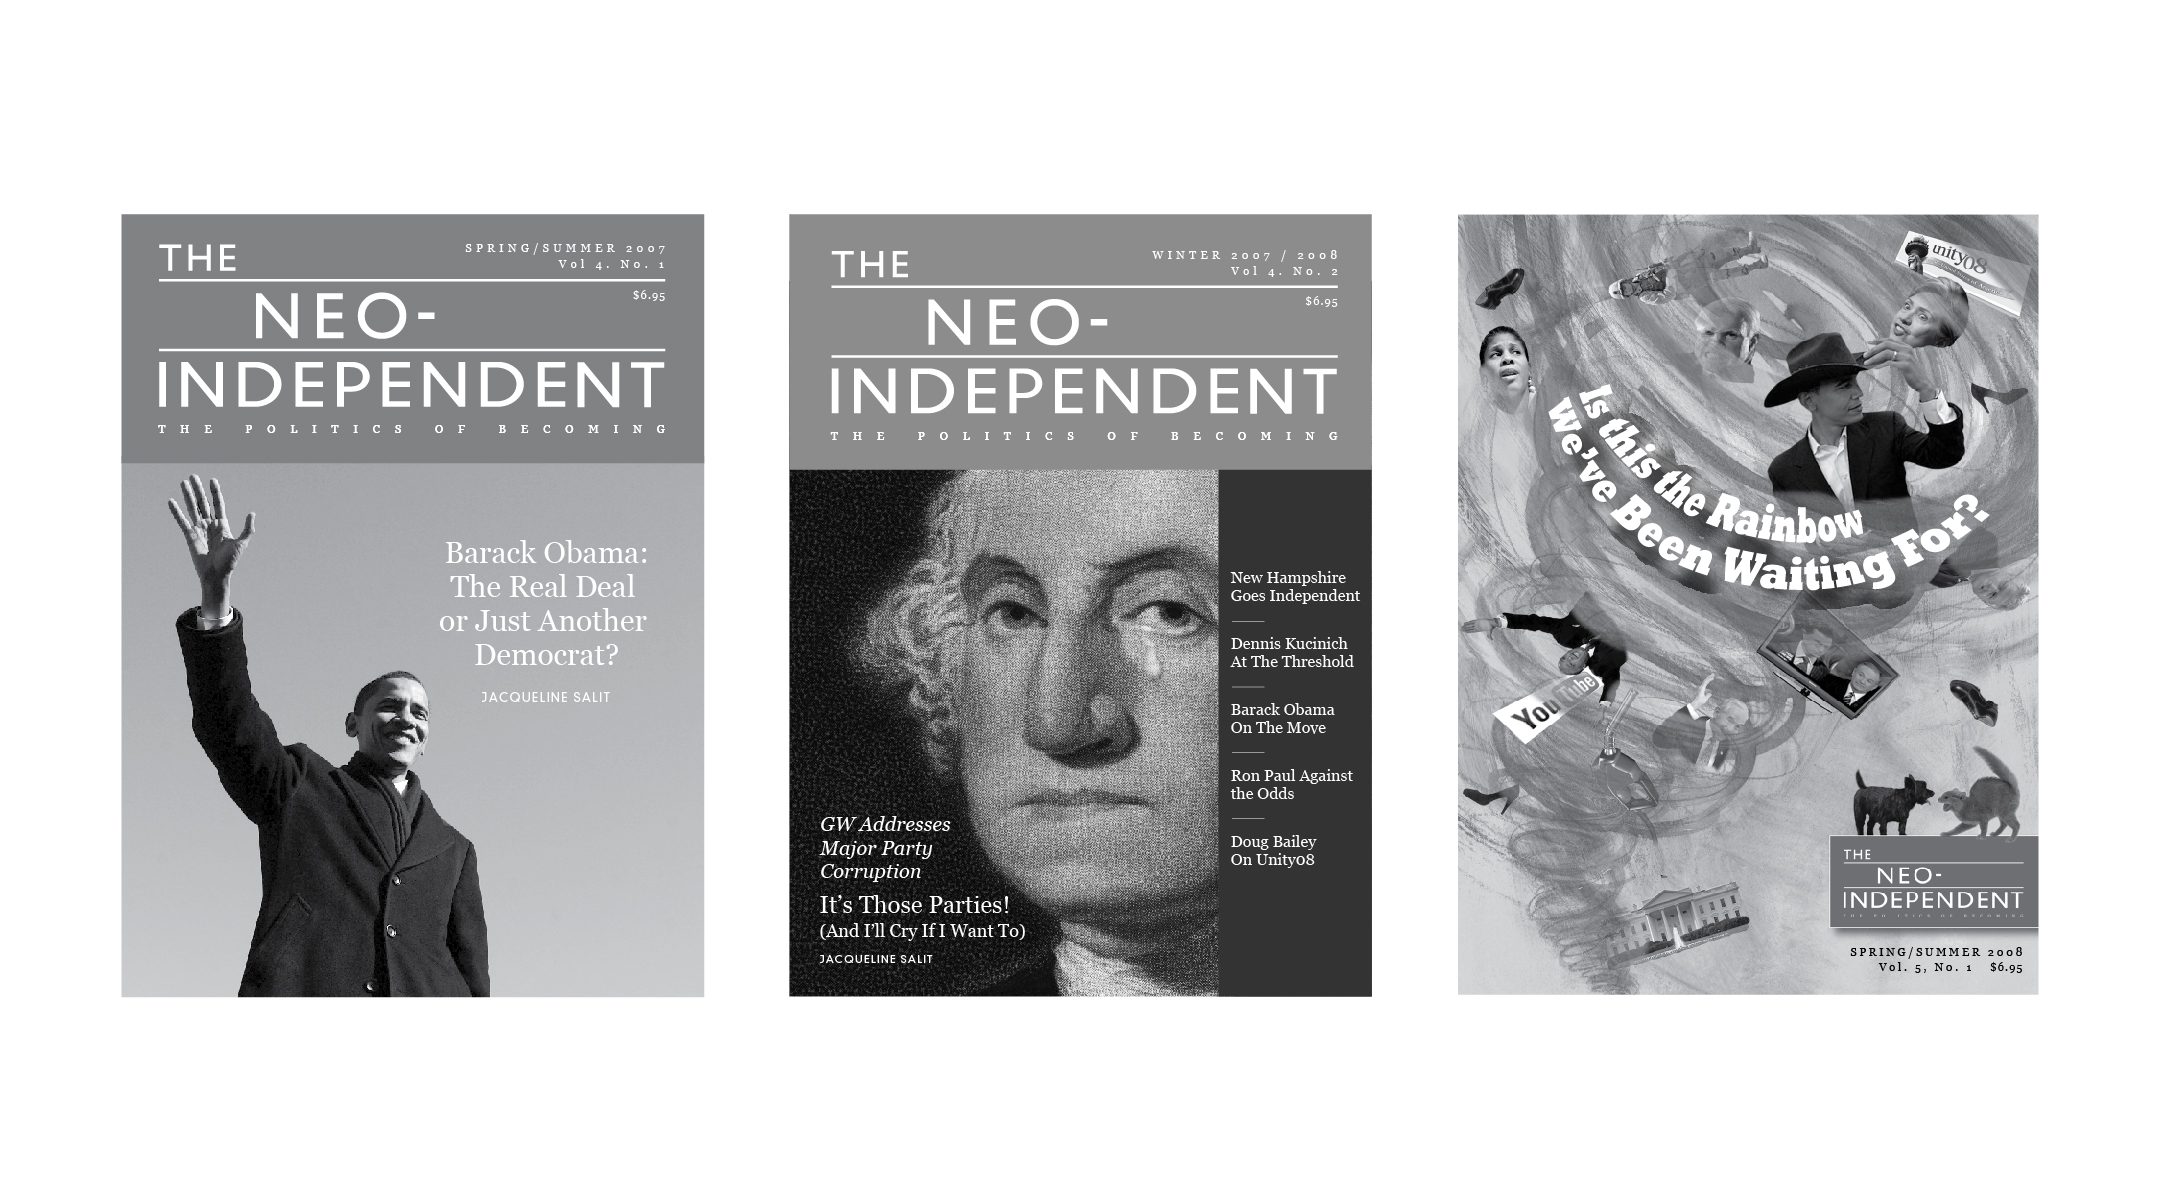 Covers and inside pages for The Neo Independent, published by Postmodern Press, LLC.